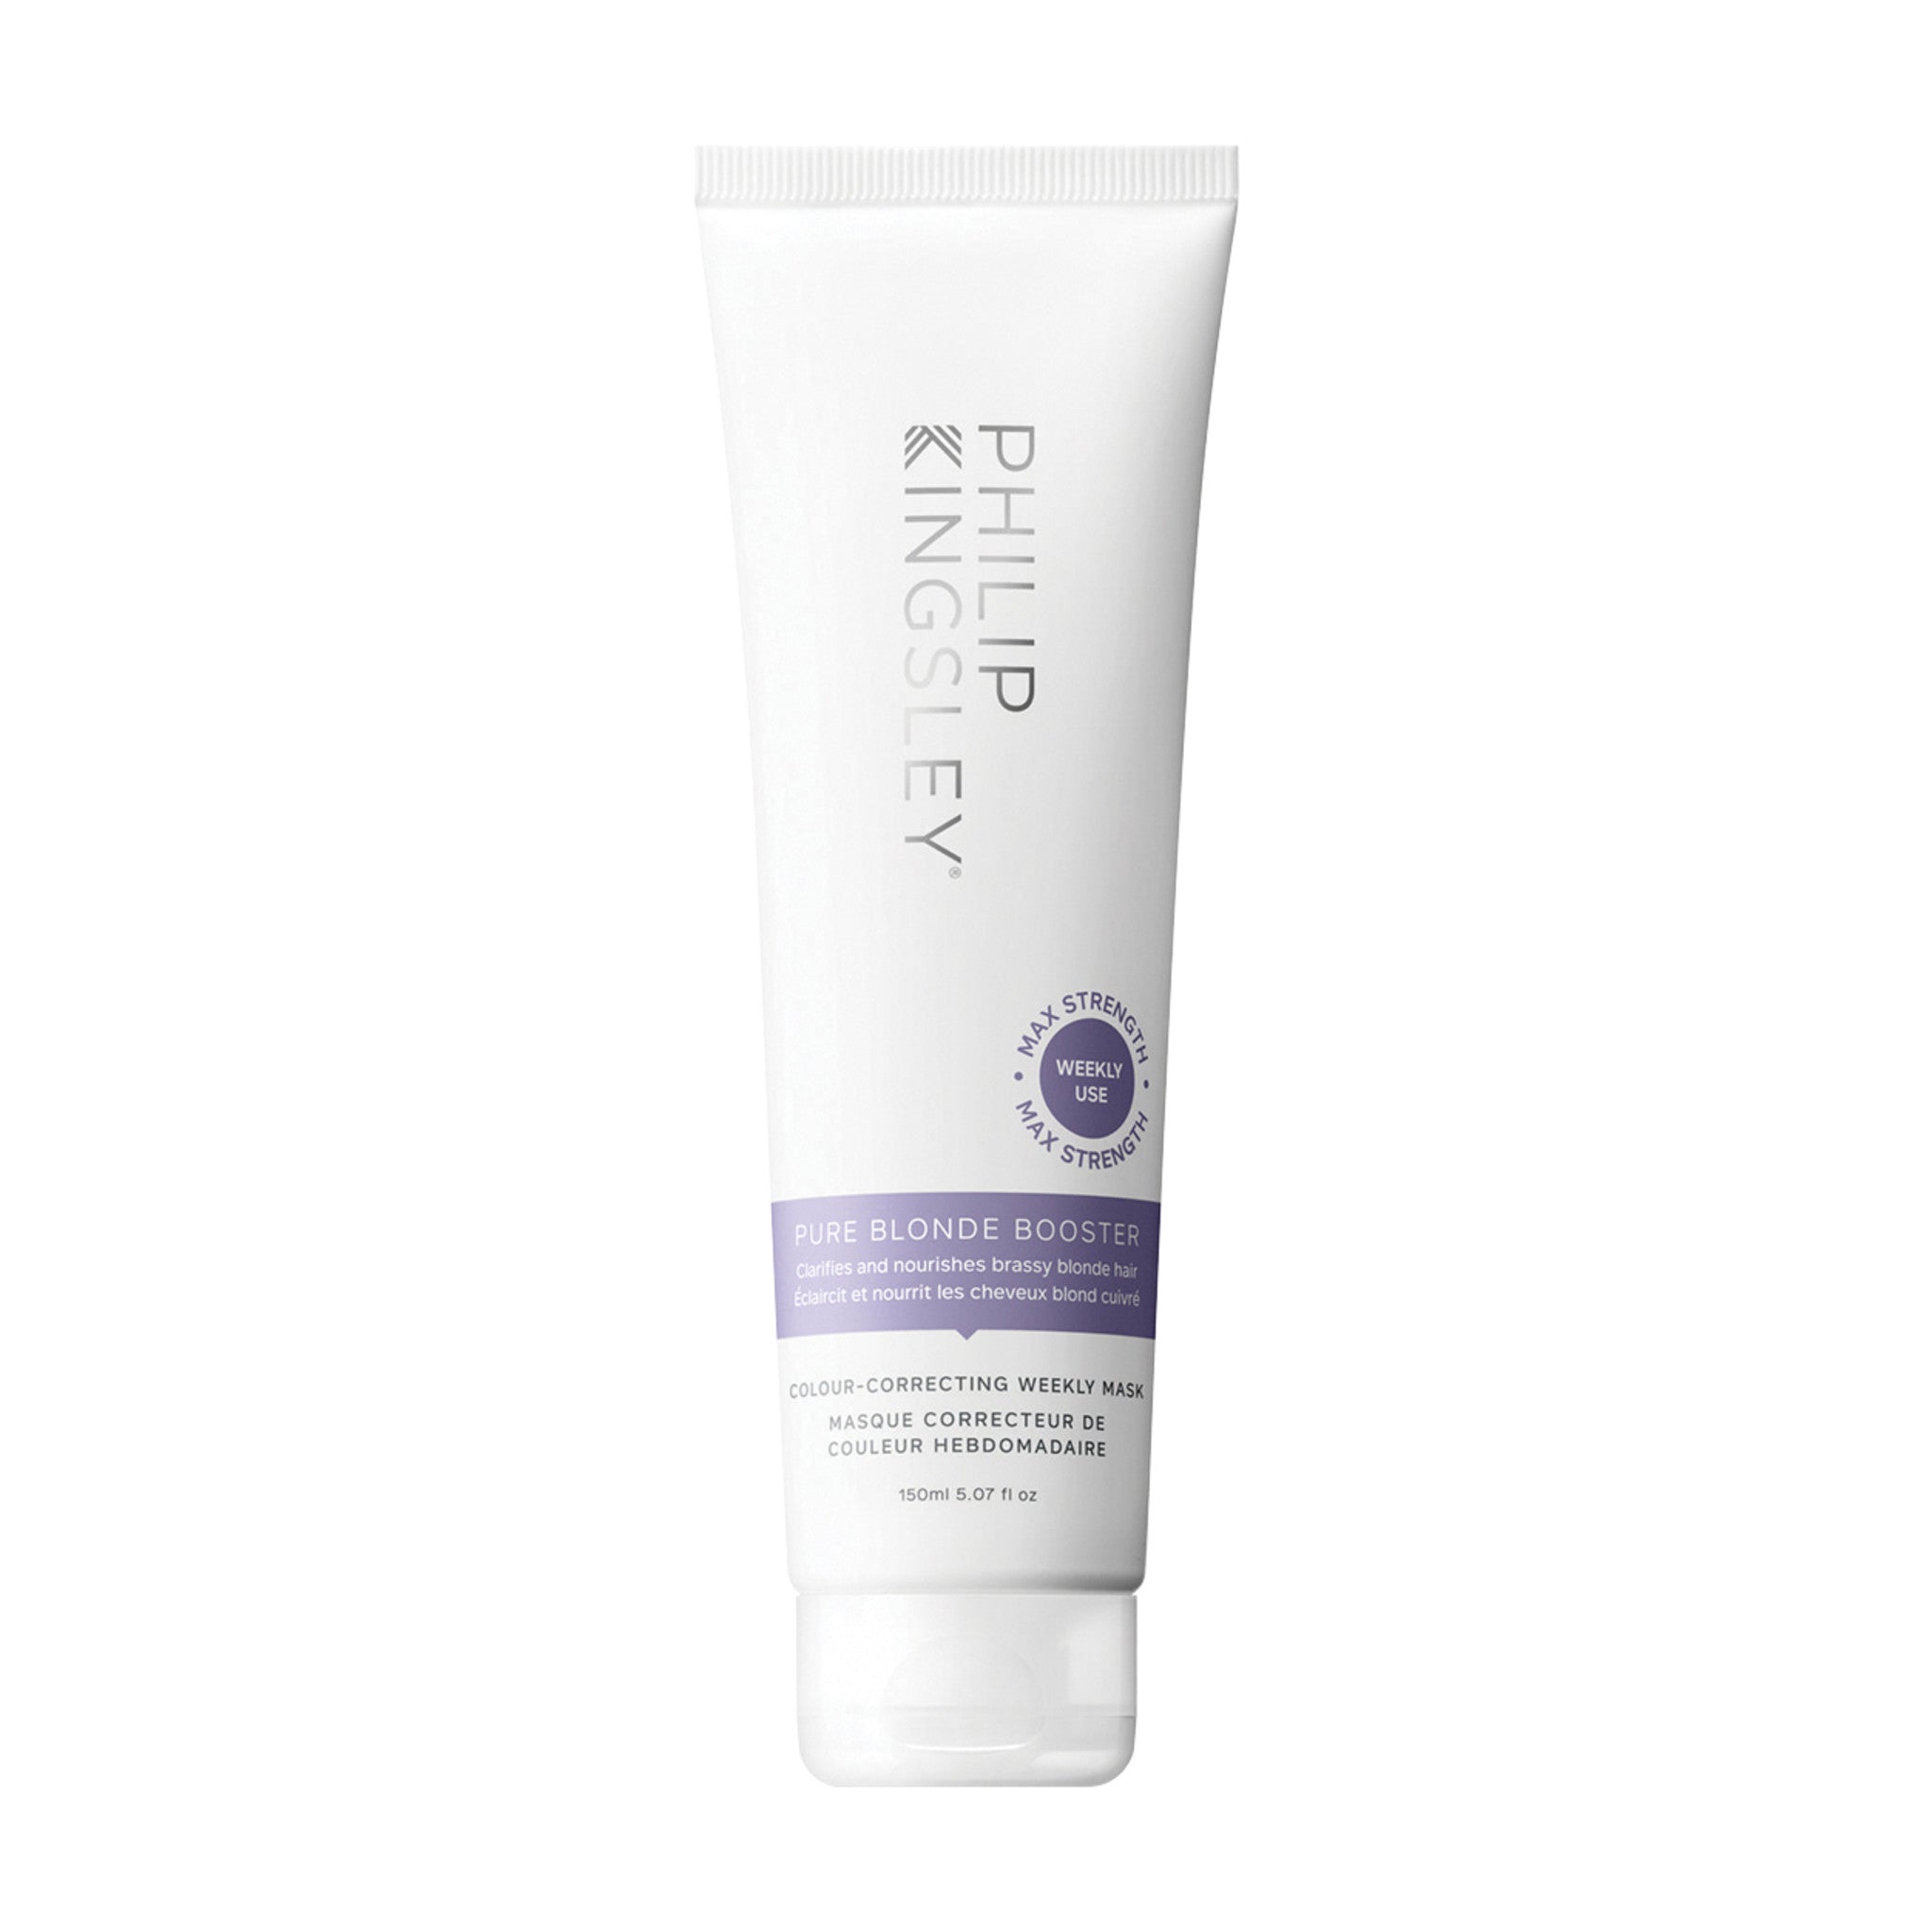 Pure Blonde Booster Colour-Correcting Weekly Mask main image.